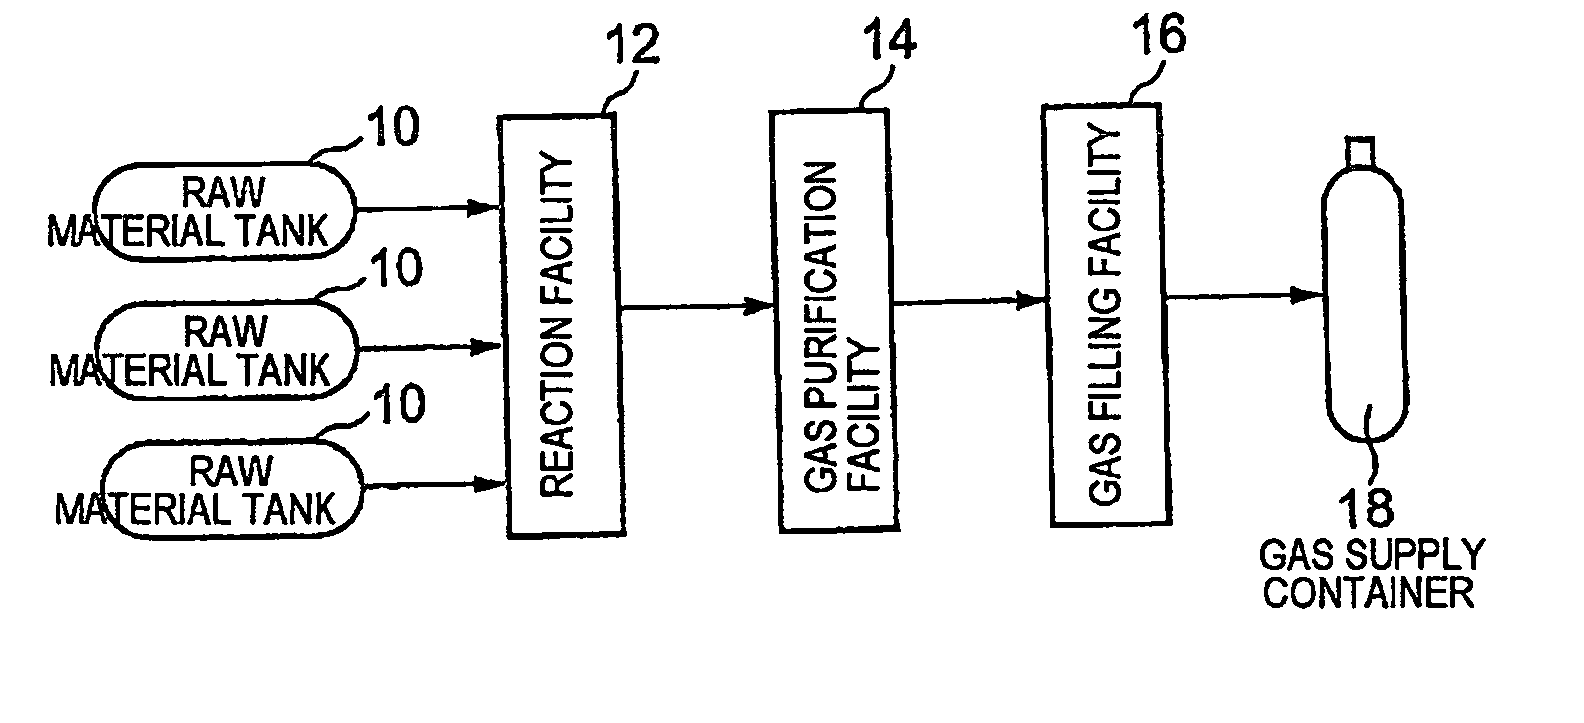 Gas Production Facility, Gas Supply Container, And Gas For Manufacture Of Electronic Devices